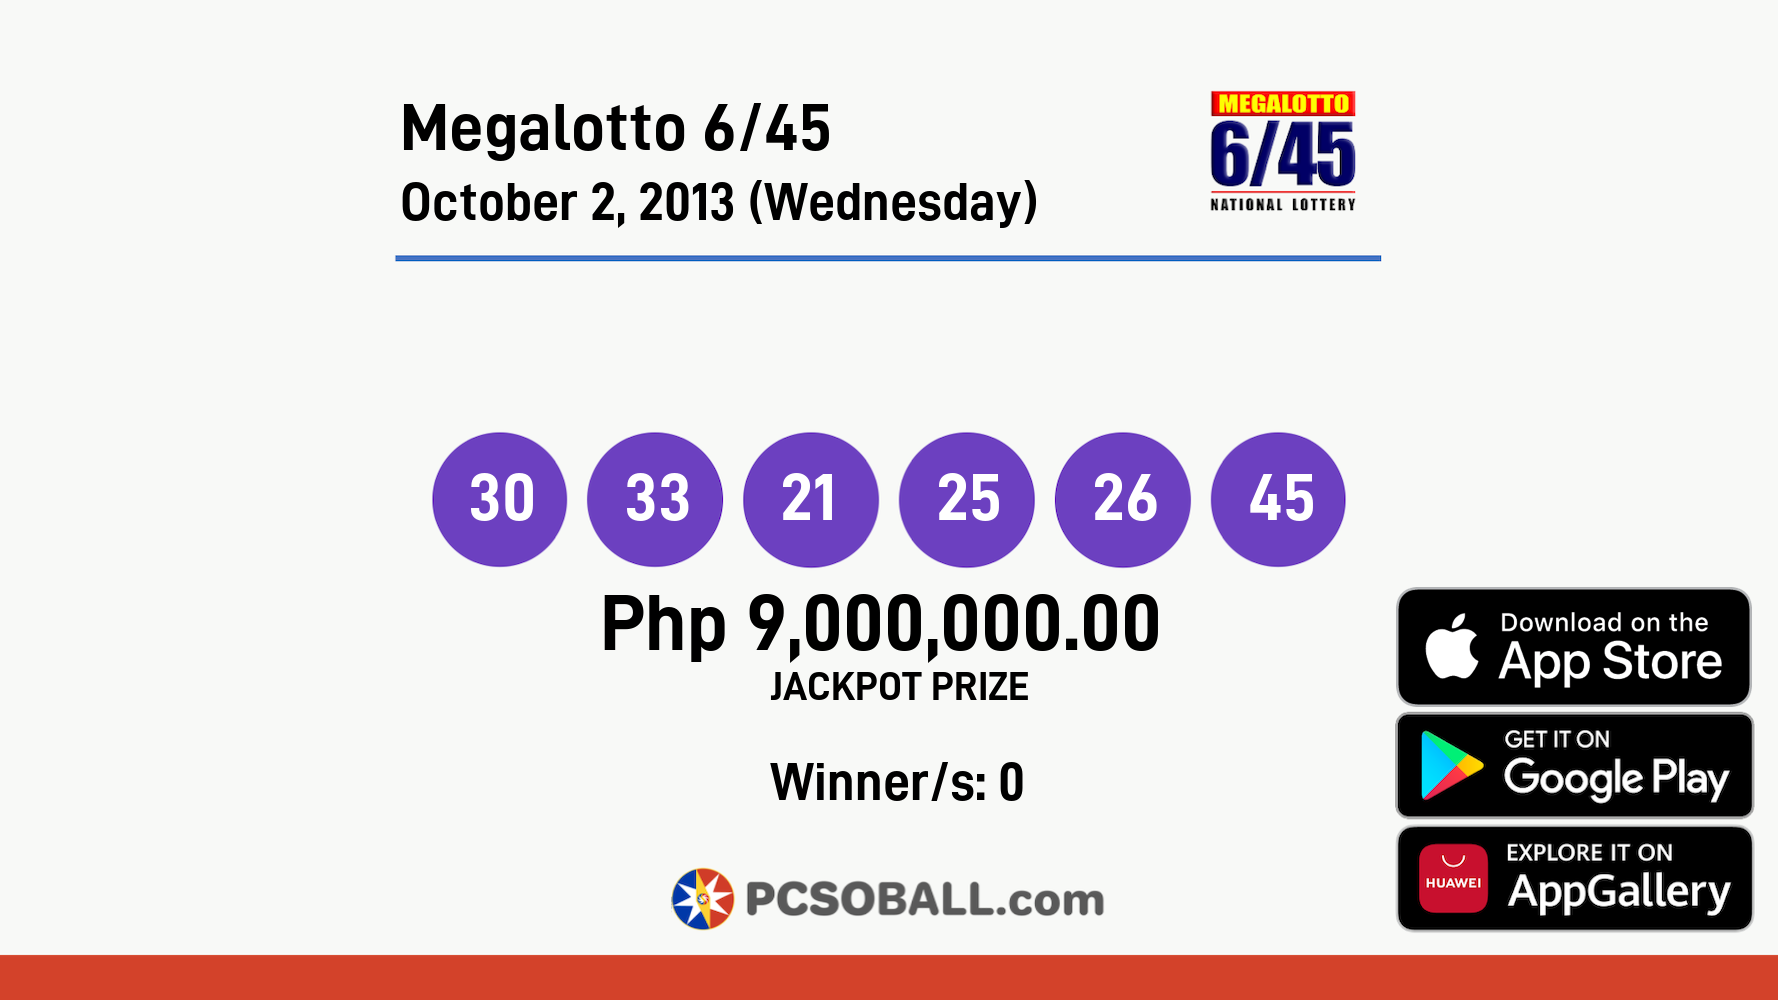 Megalotto 6/45 October 2, 2013 (Wednesday) Result